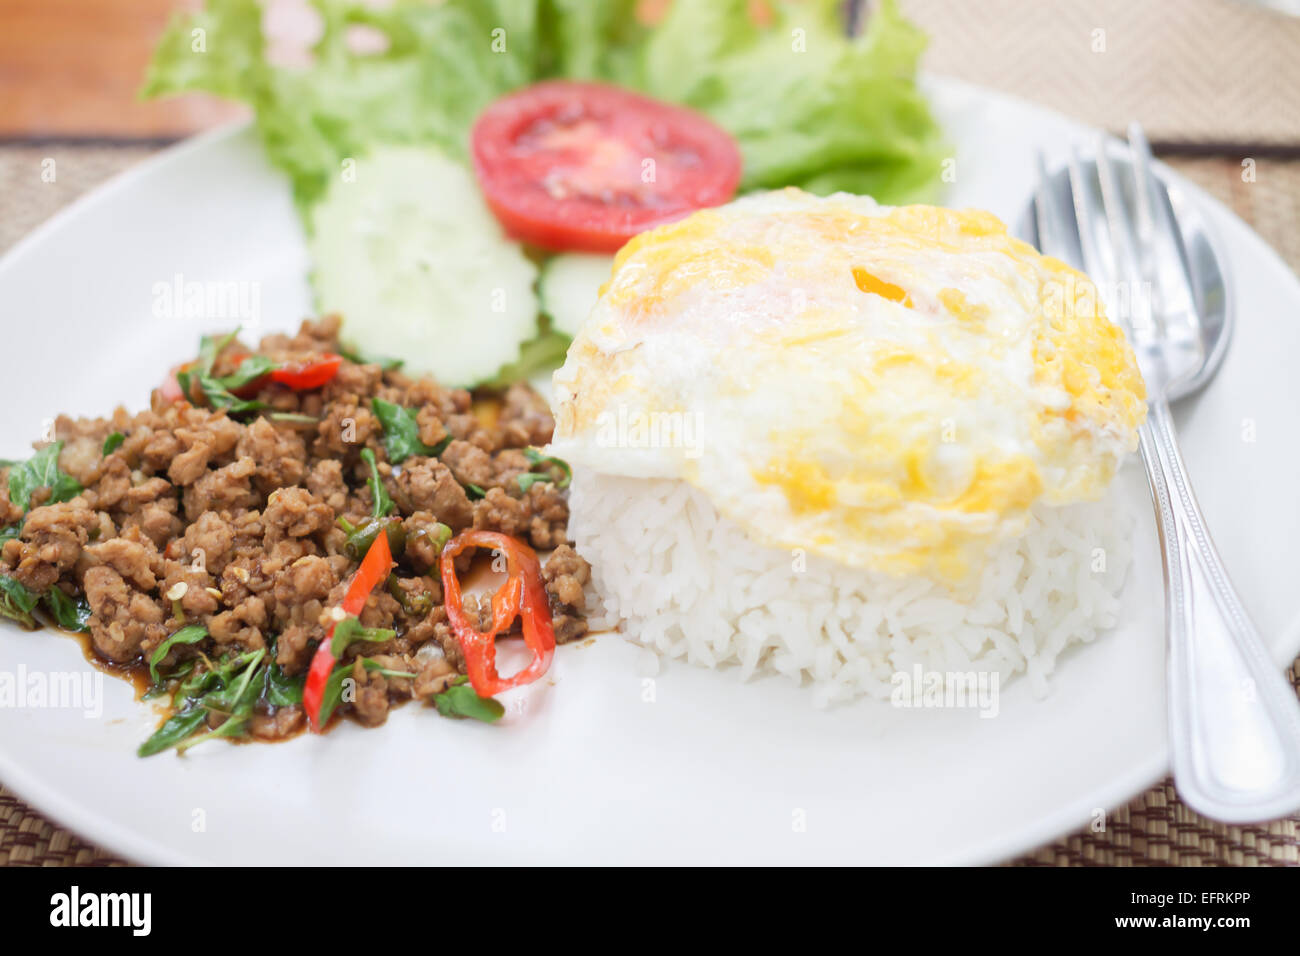 Thai spicy food basil pork fried rice with fried egg, stock photo Stock Photo